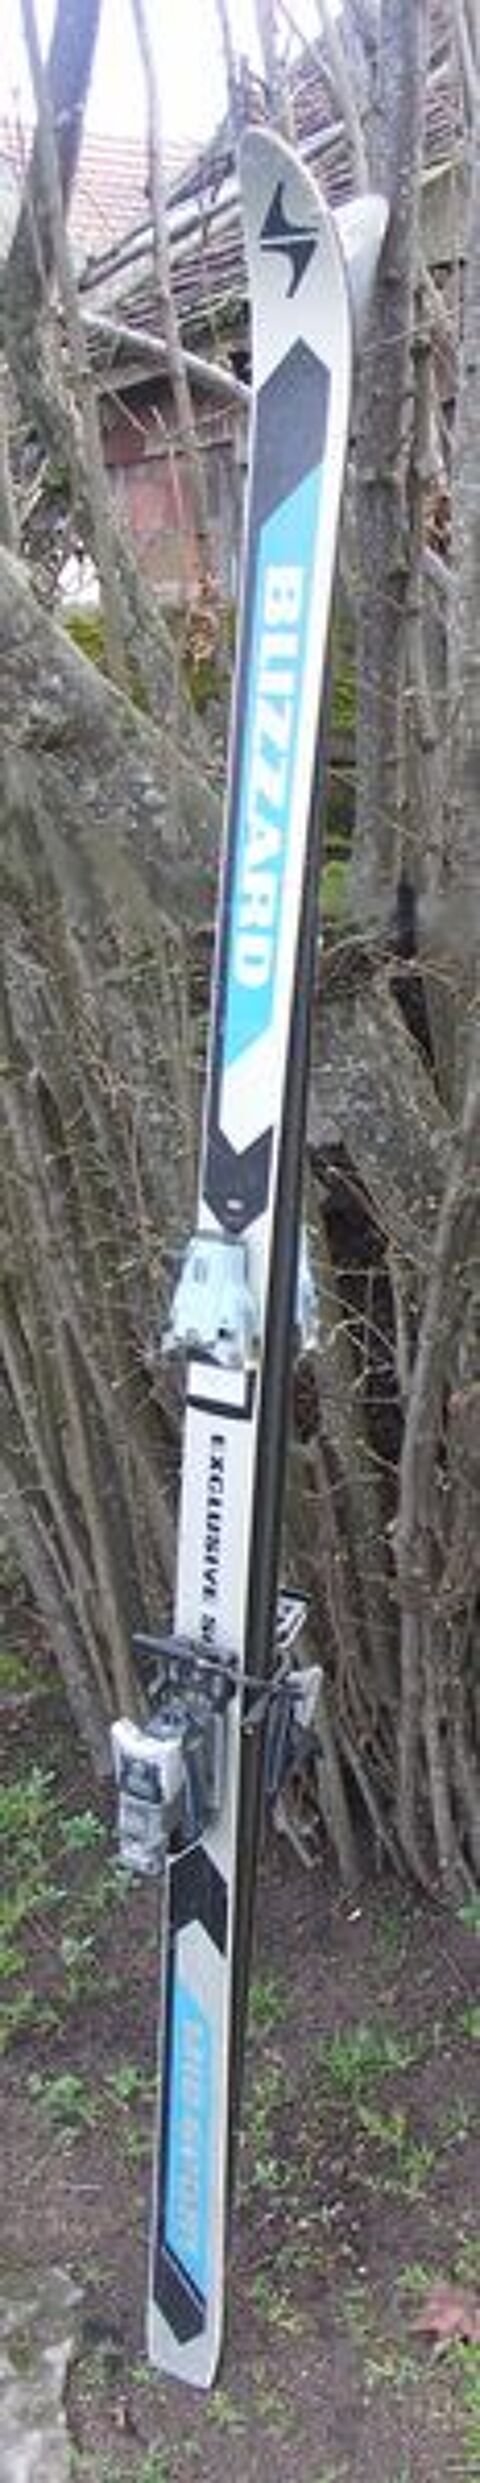 skis 10 Crilly (03)